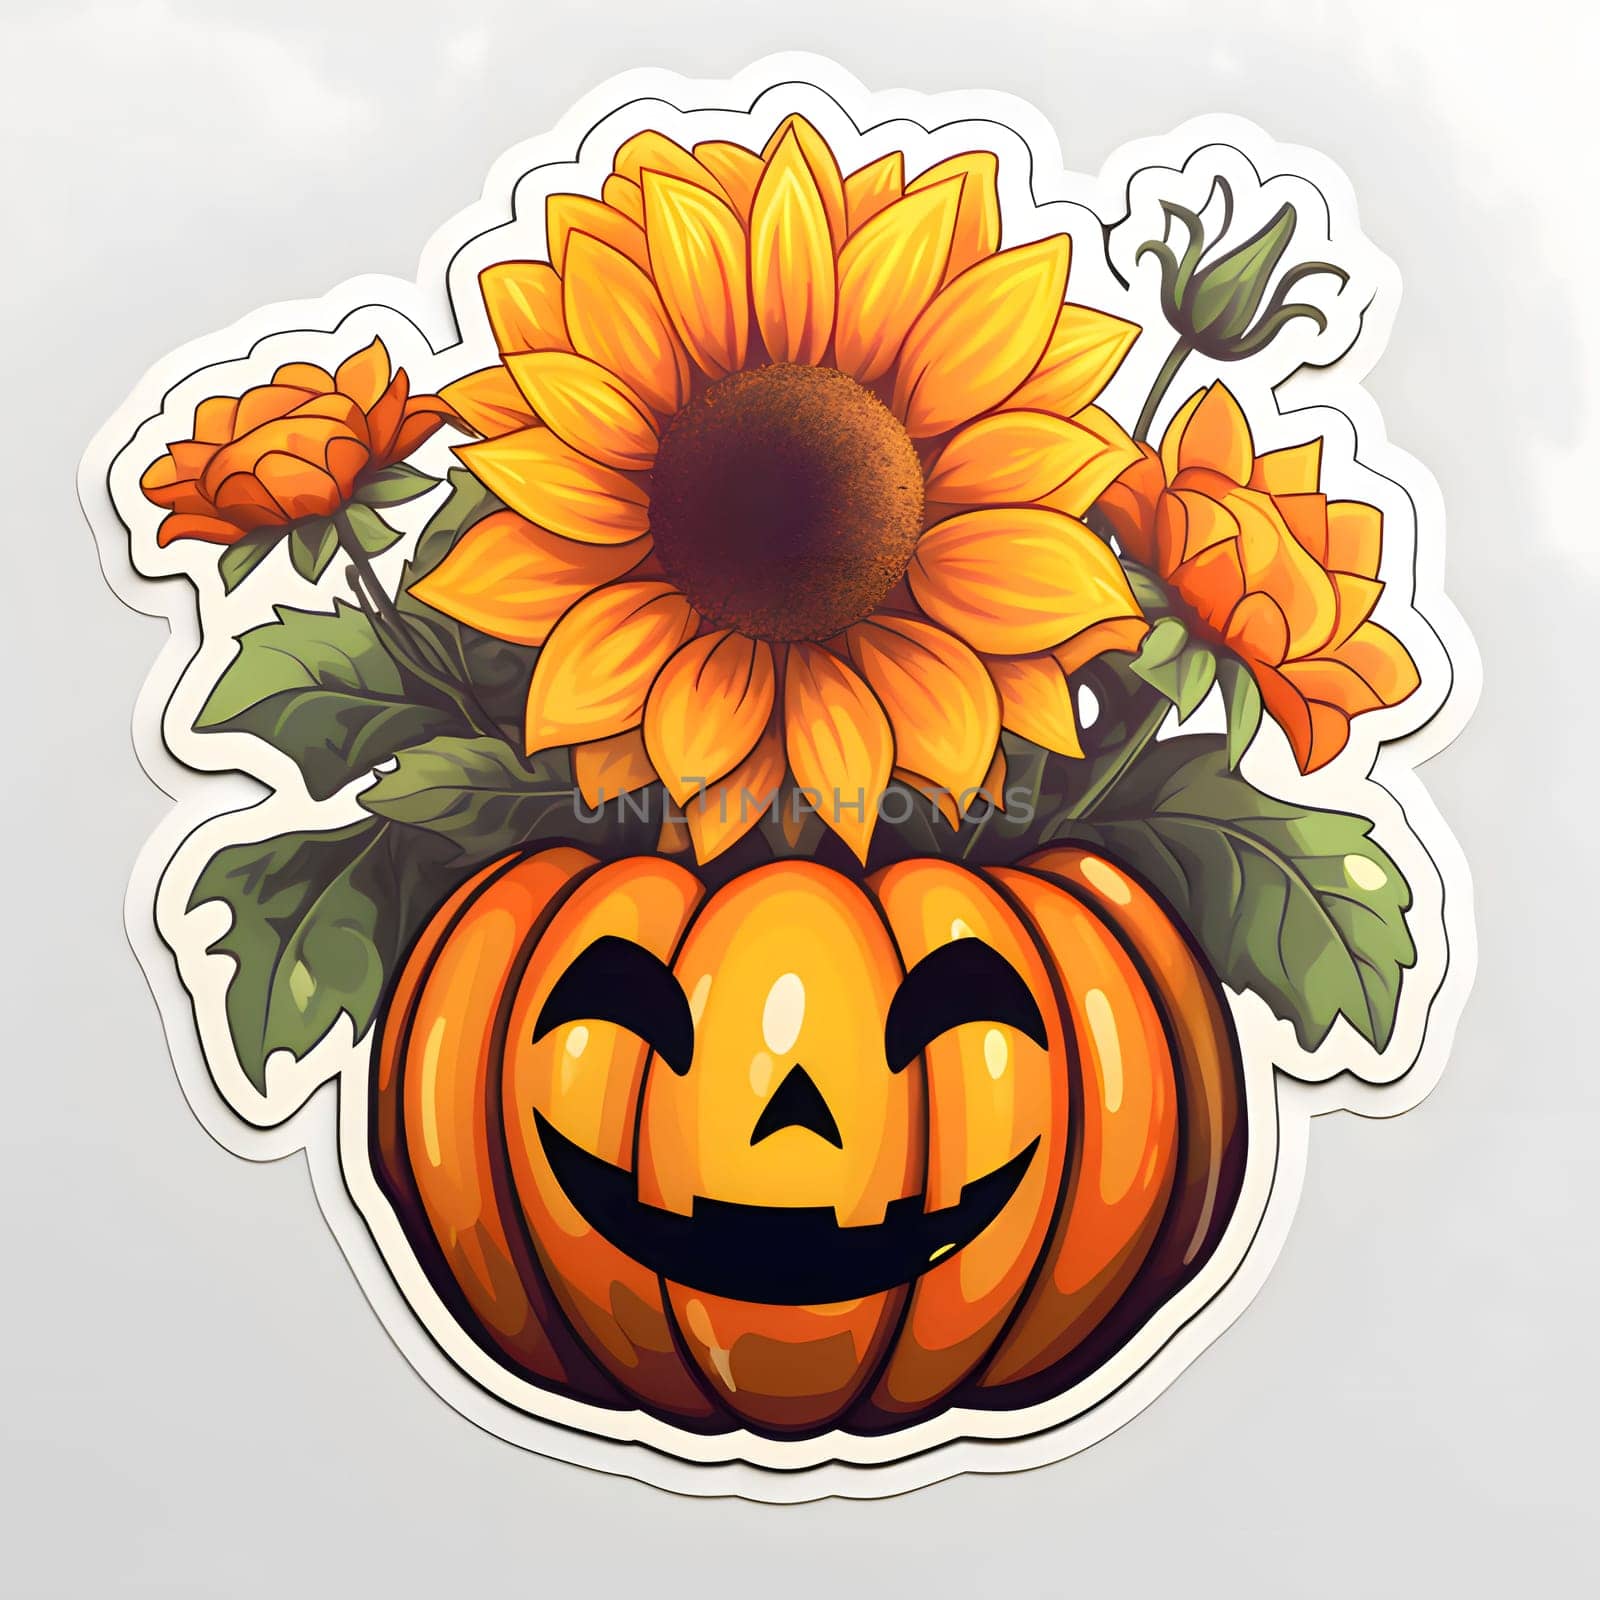 Jack-o-lantern pumpkin sticker with sunflowers, Halloween image on a bright isolated background. Atmosphere of darkness and fear.